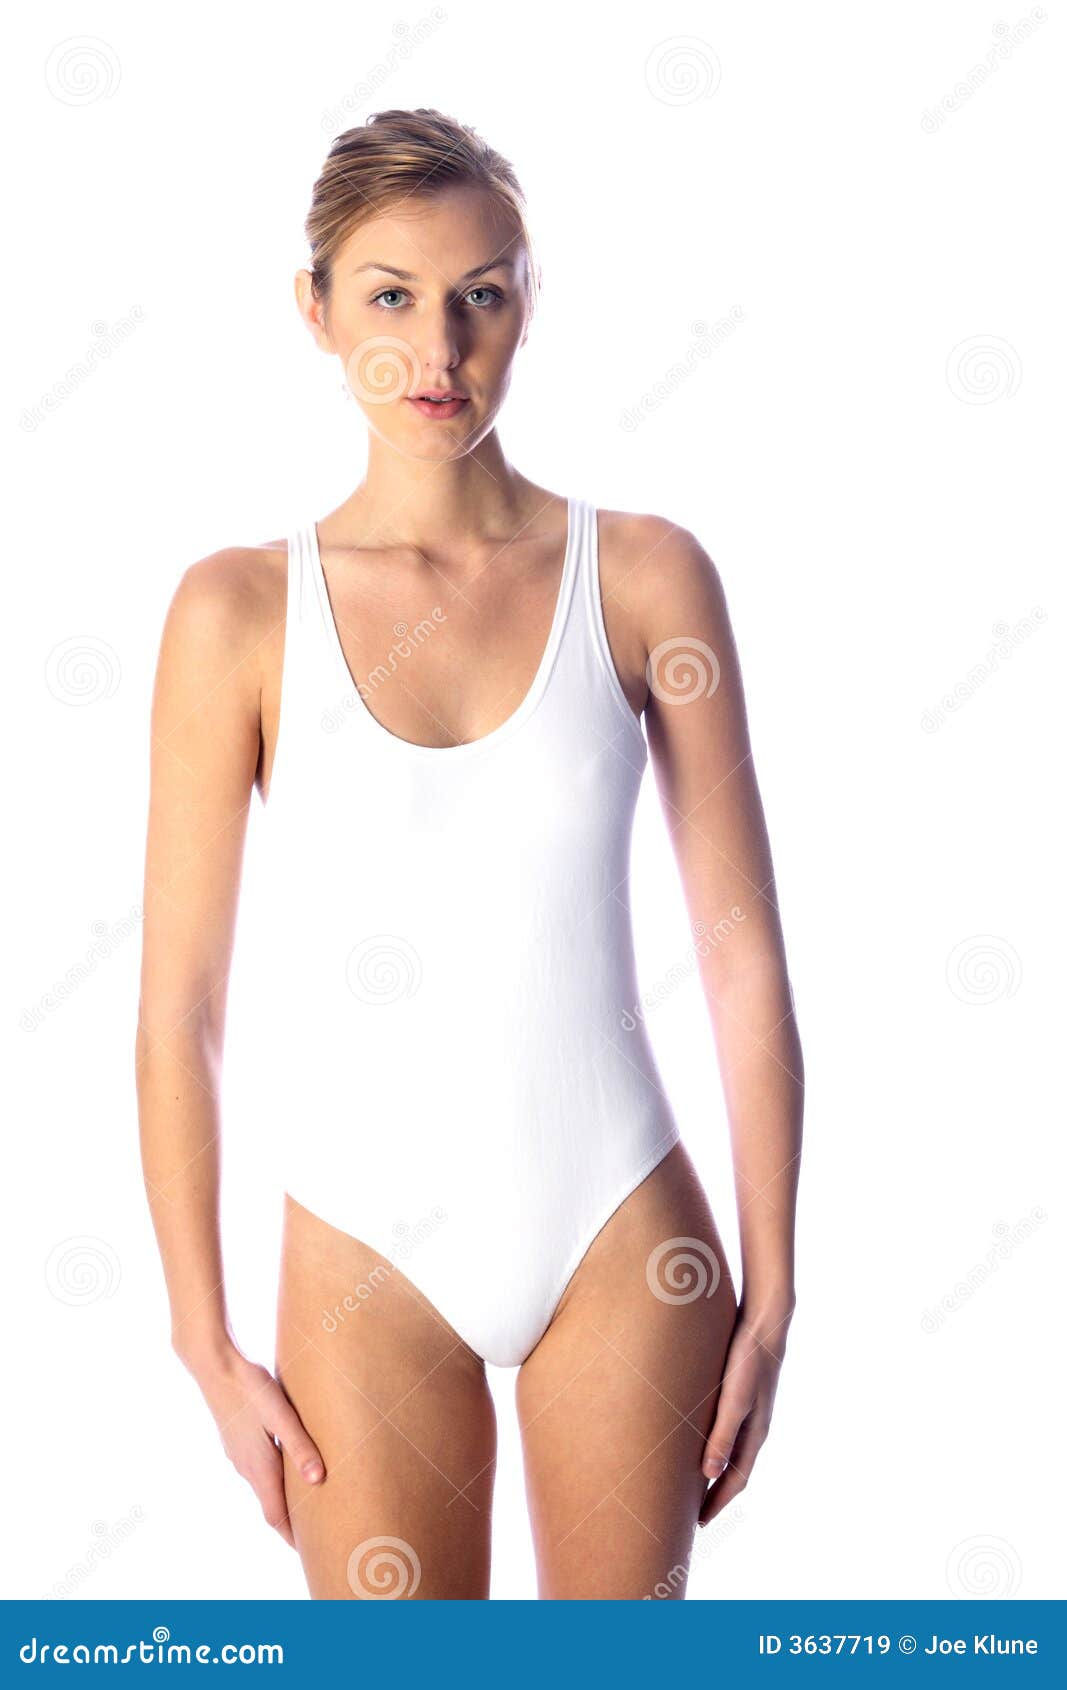 White body suit stock image. Image of clothing, healthy - 3637719